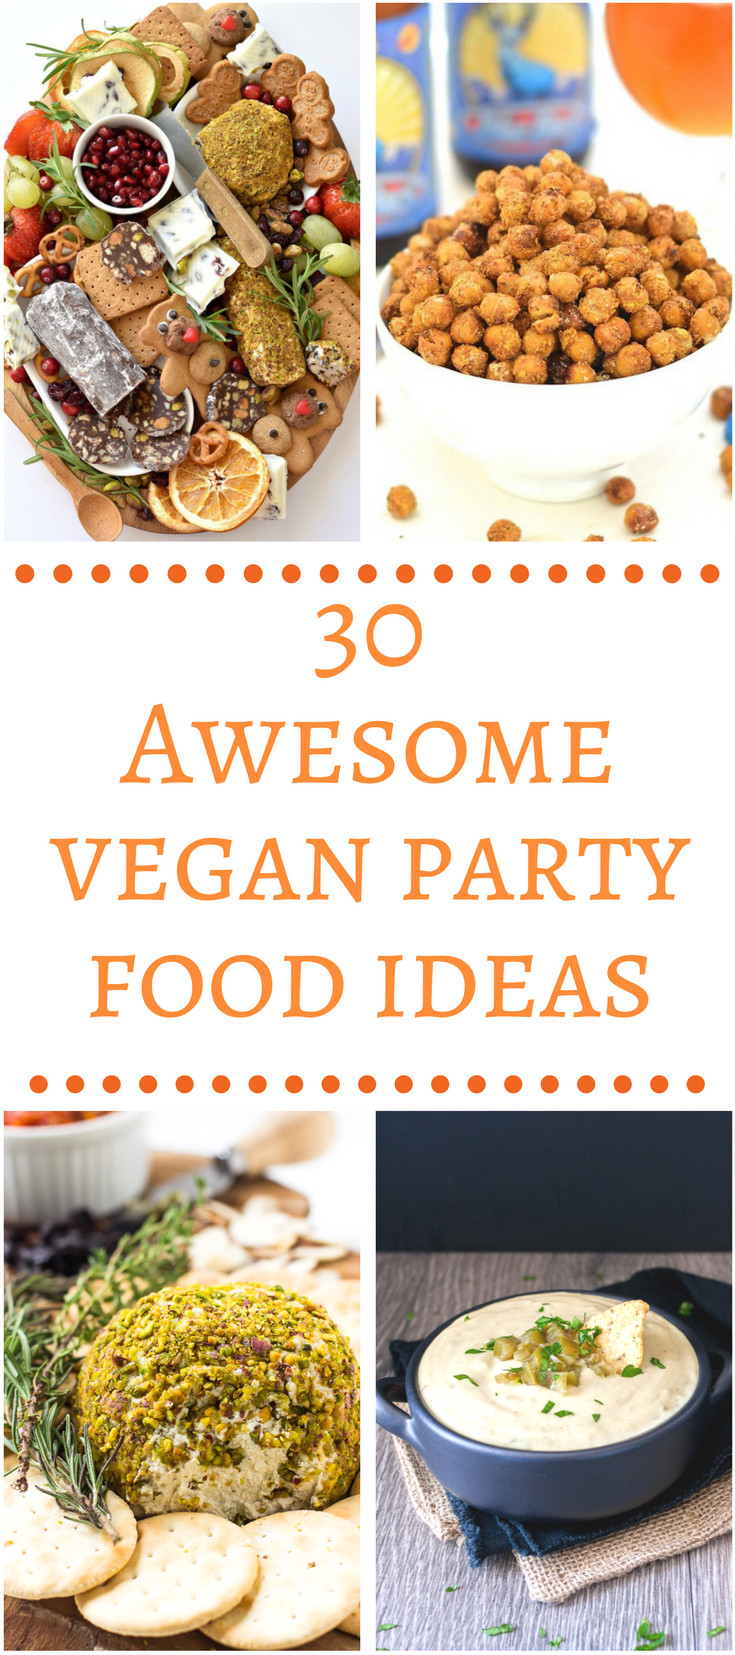 Vegan Party Recipes
 30 Awesome Vegan Party Food Ideas